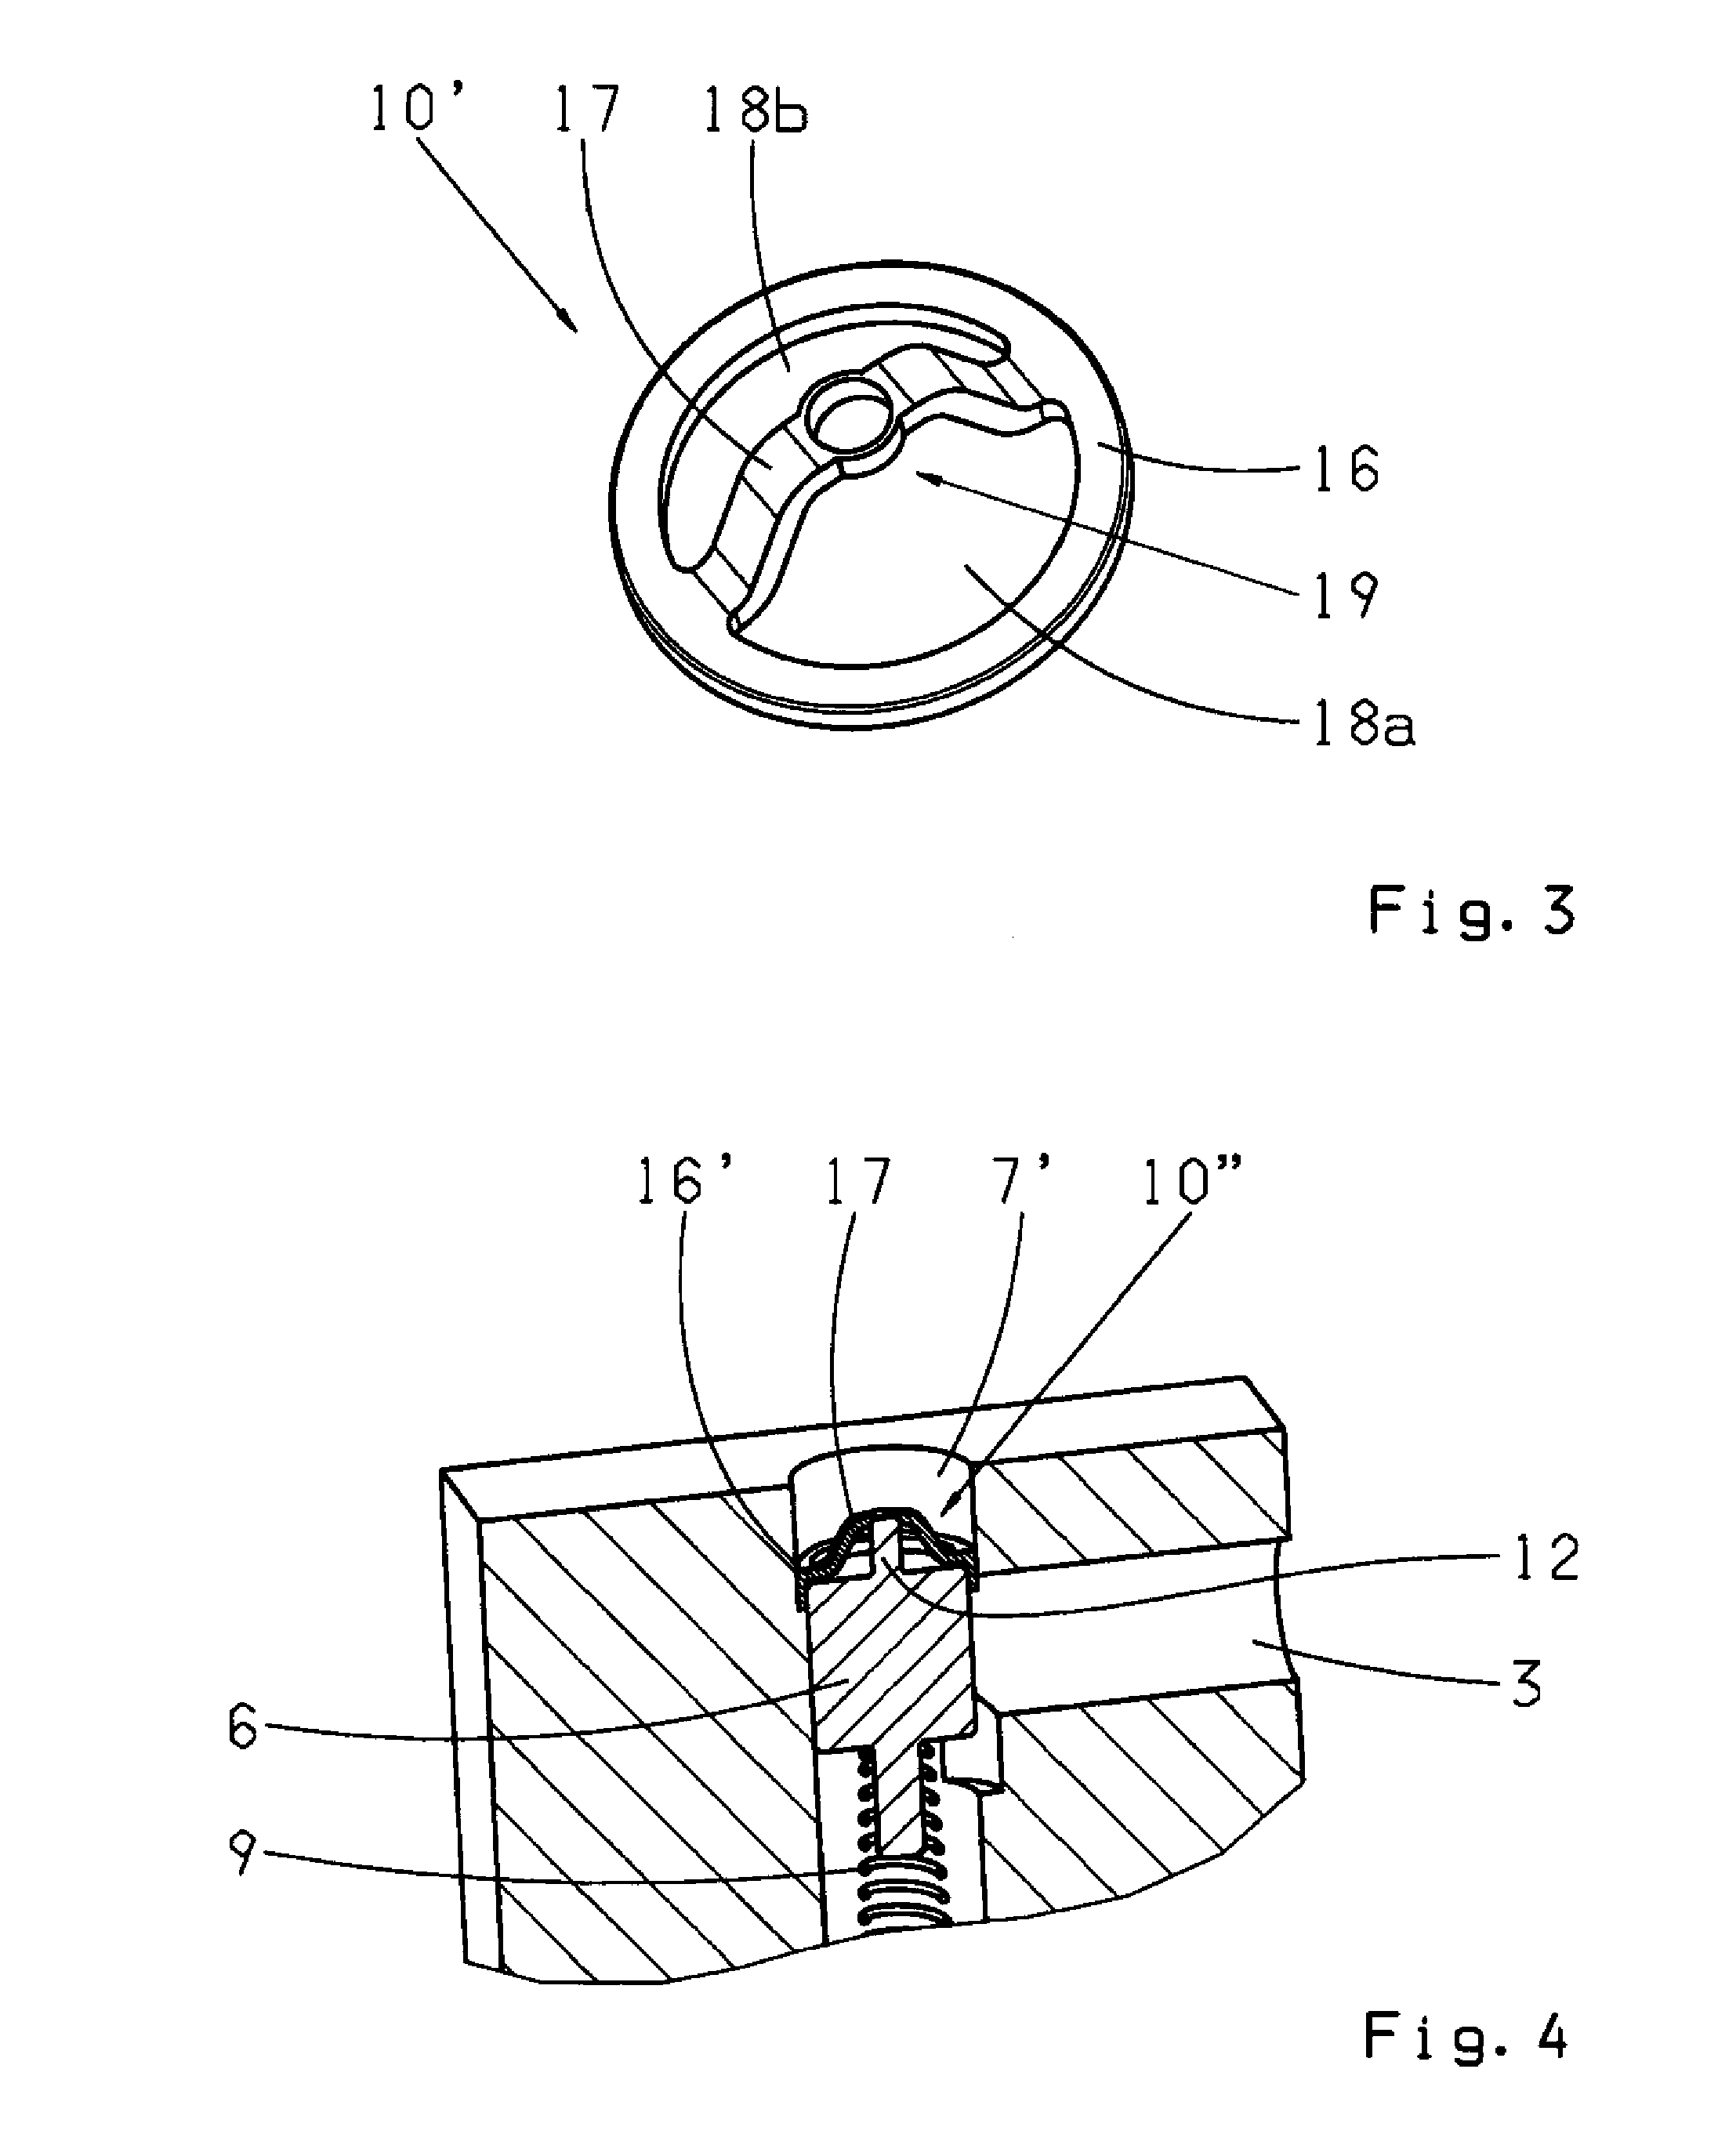 Cooling oil circulation of a motor-vehicle transmission with a control valve